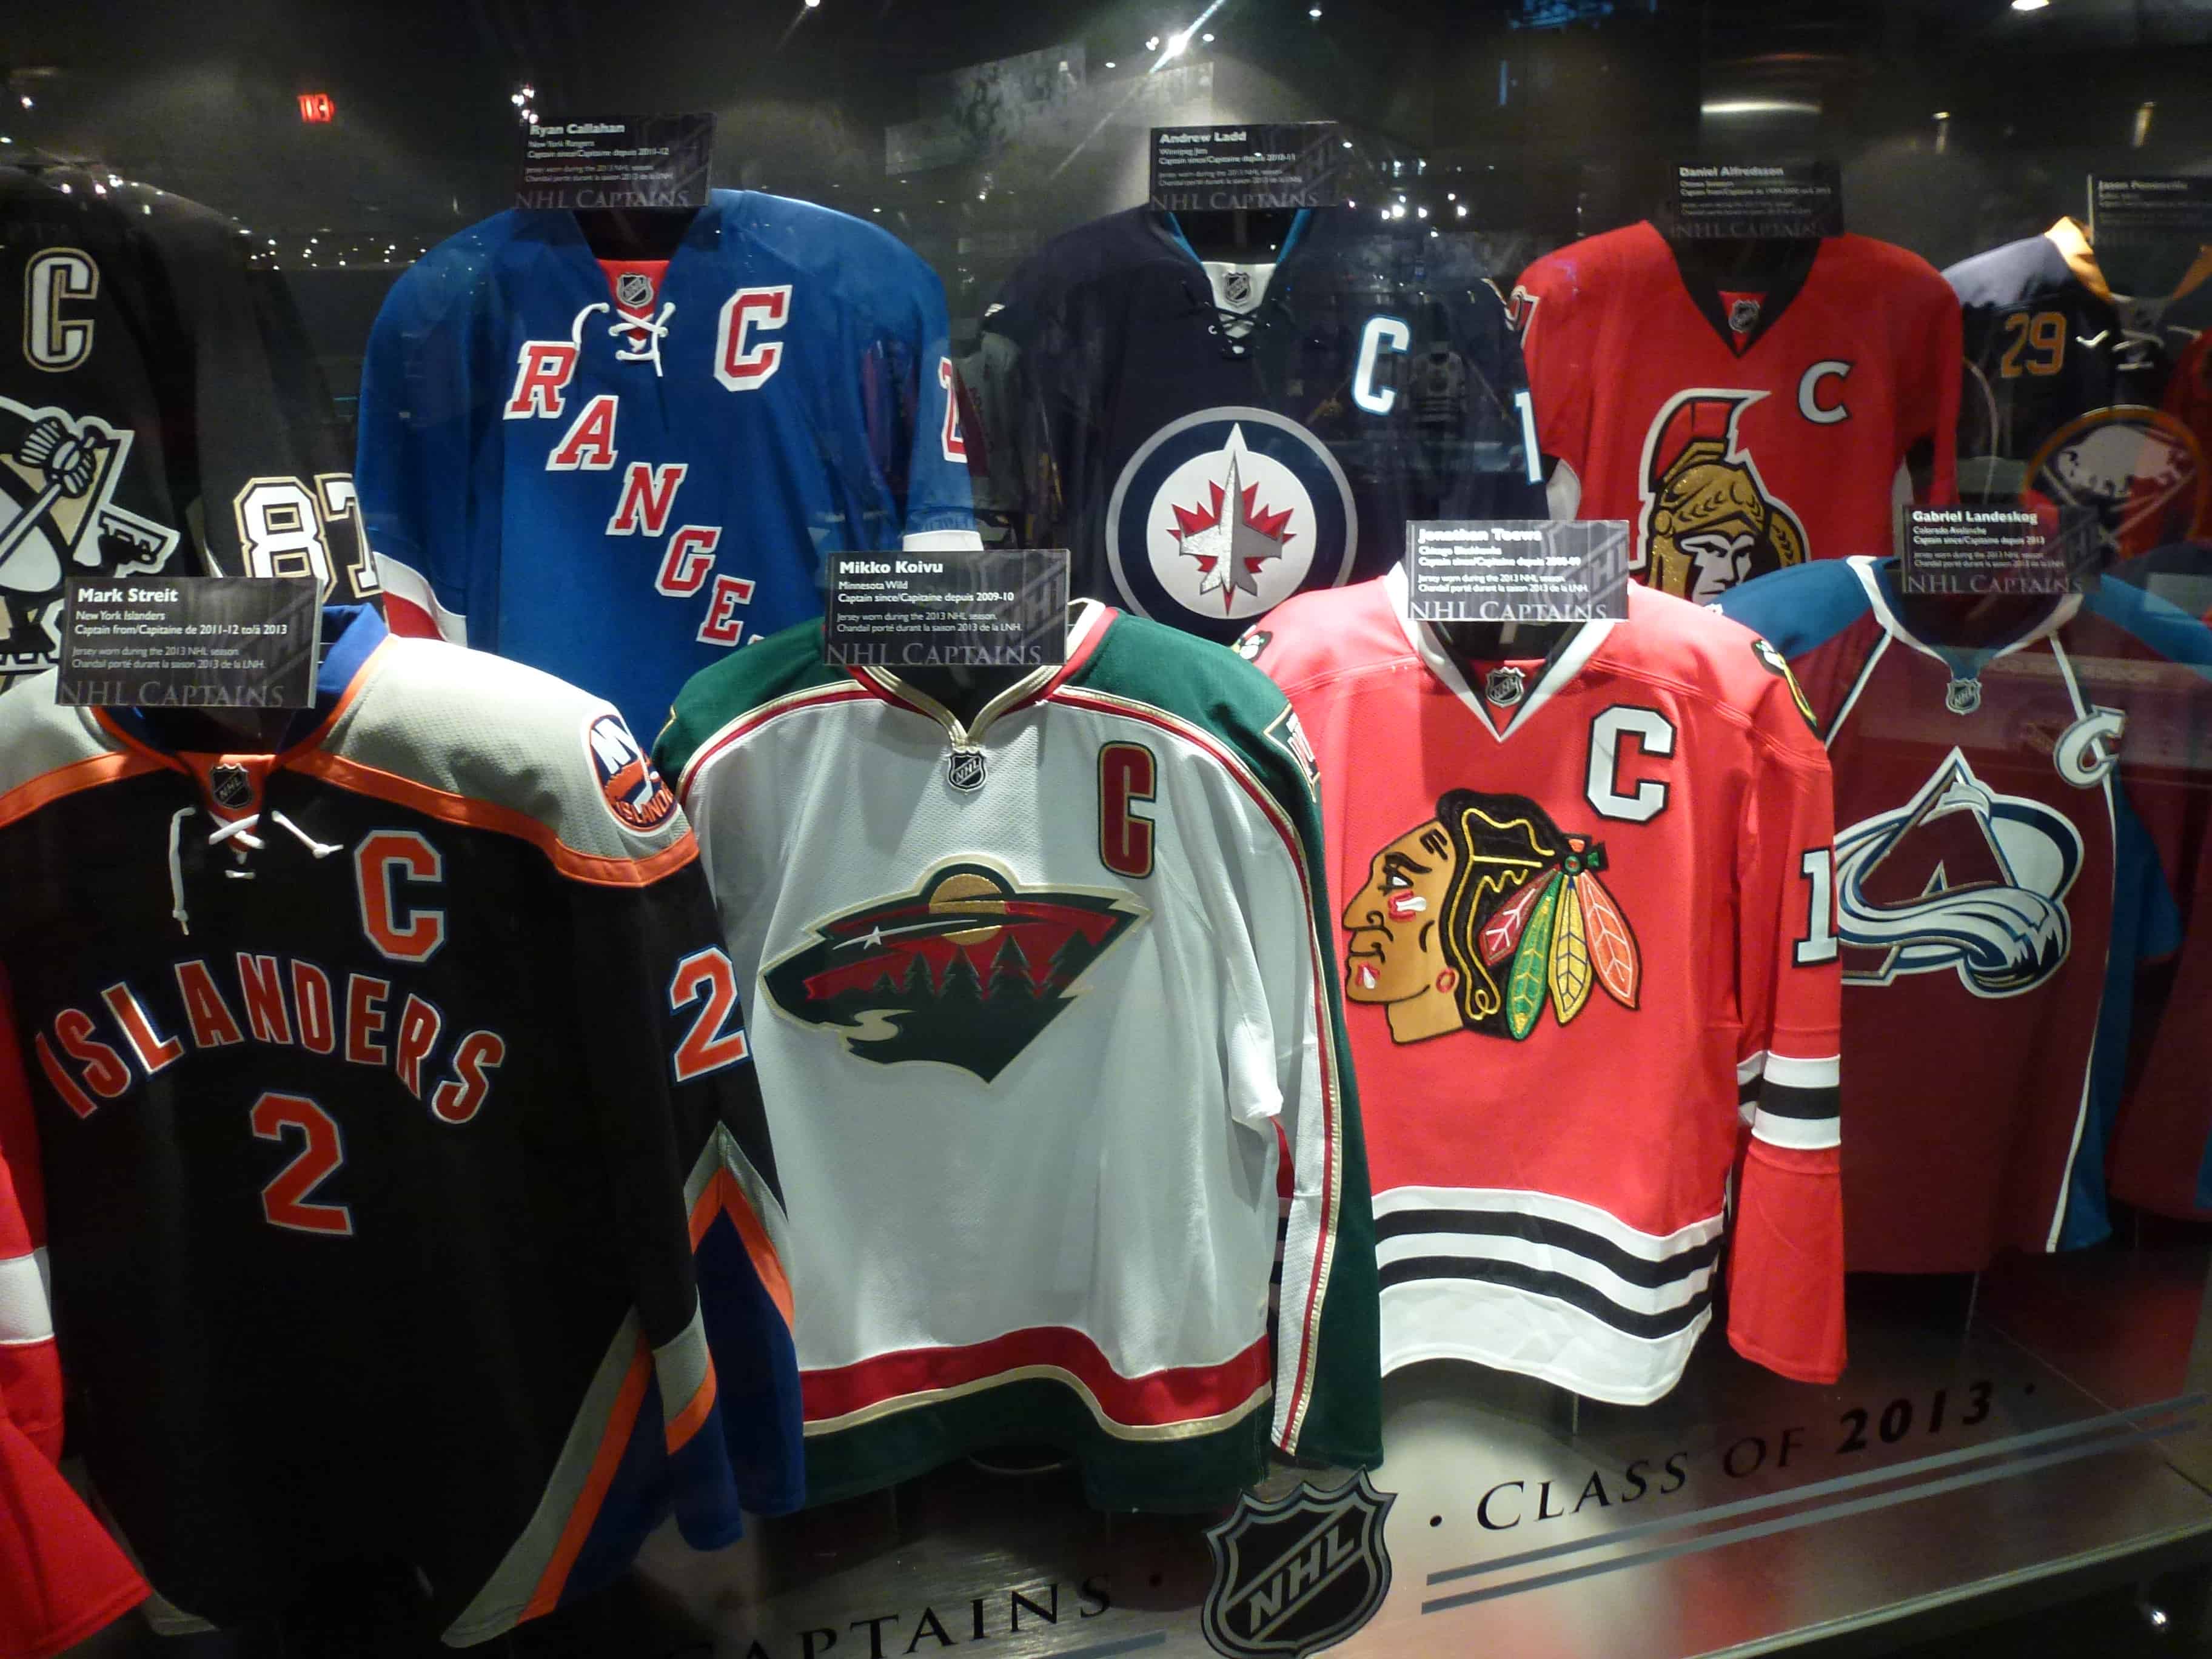 NHL captains display at the Hockey Hall of Fame in Toronto, Ontario, Canada